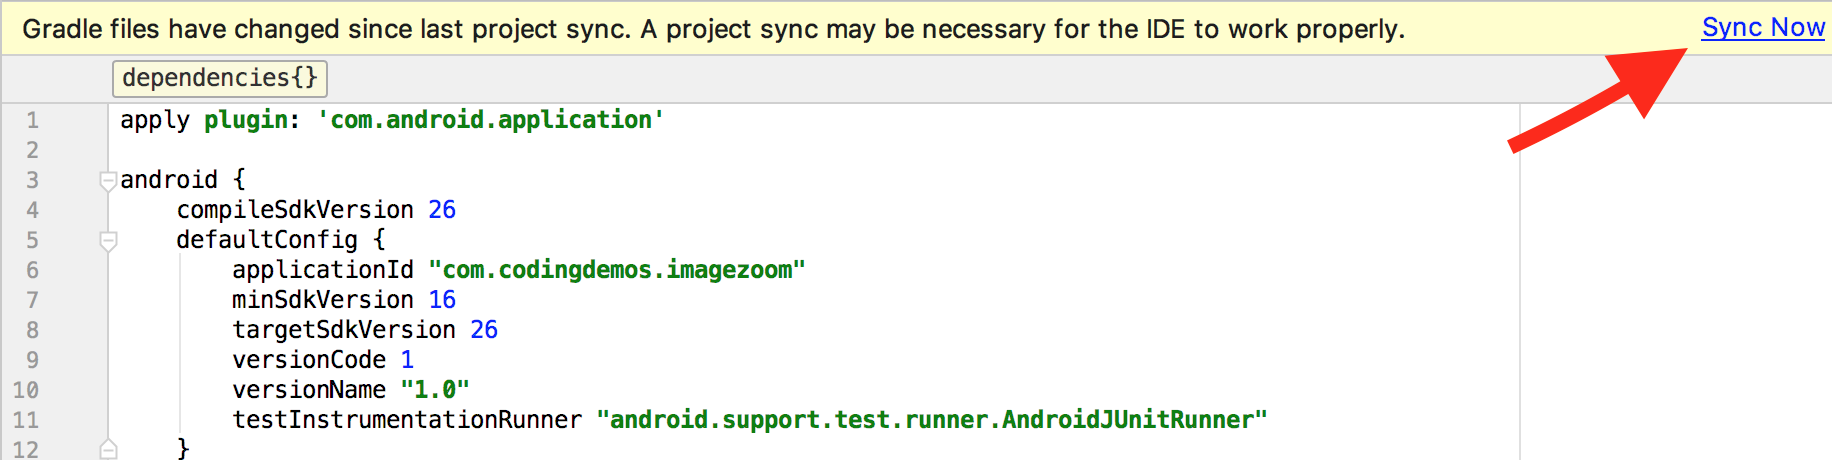 Where is the "Sync Now" button in Android Studio? - Stack Overflow